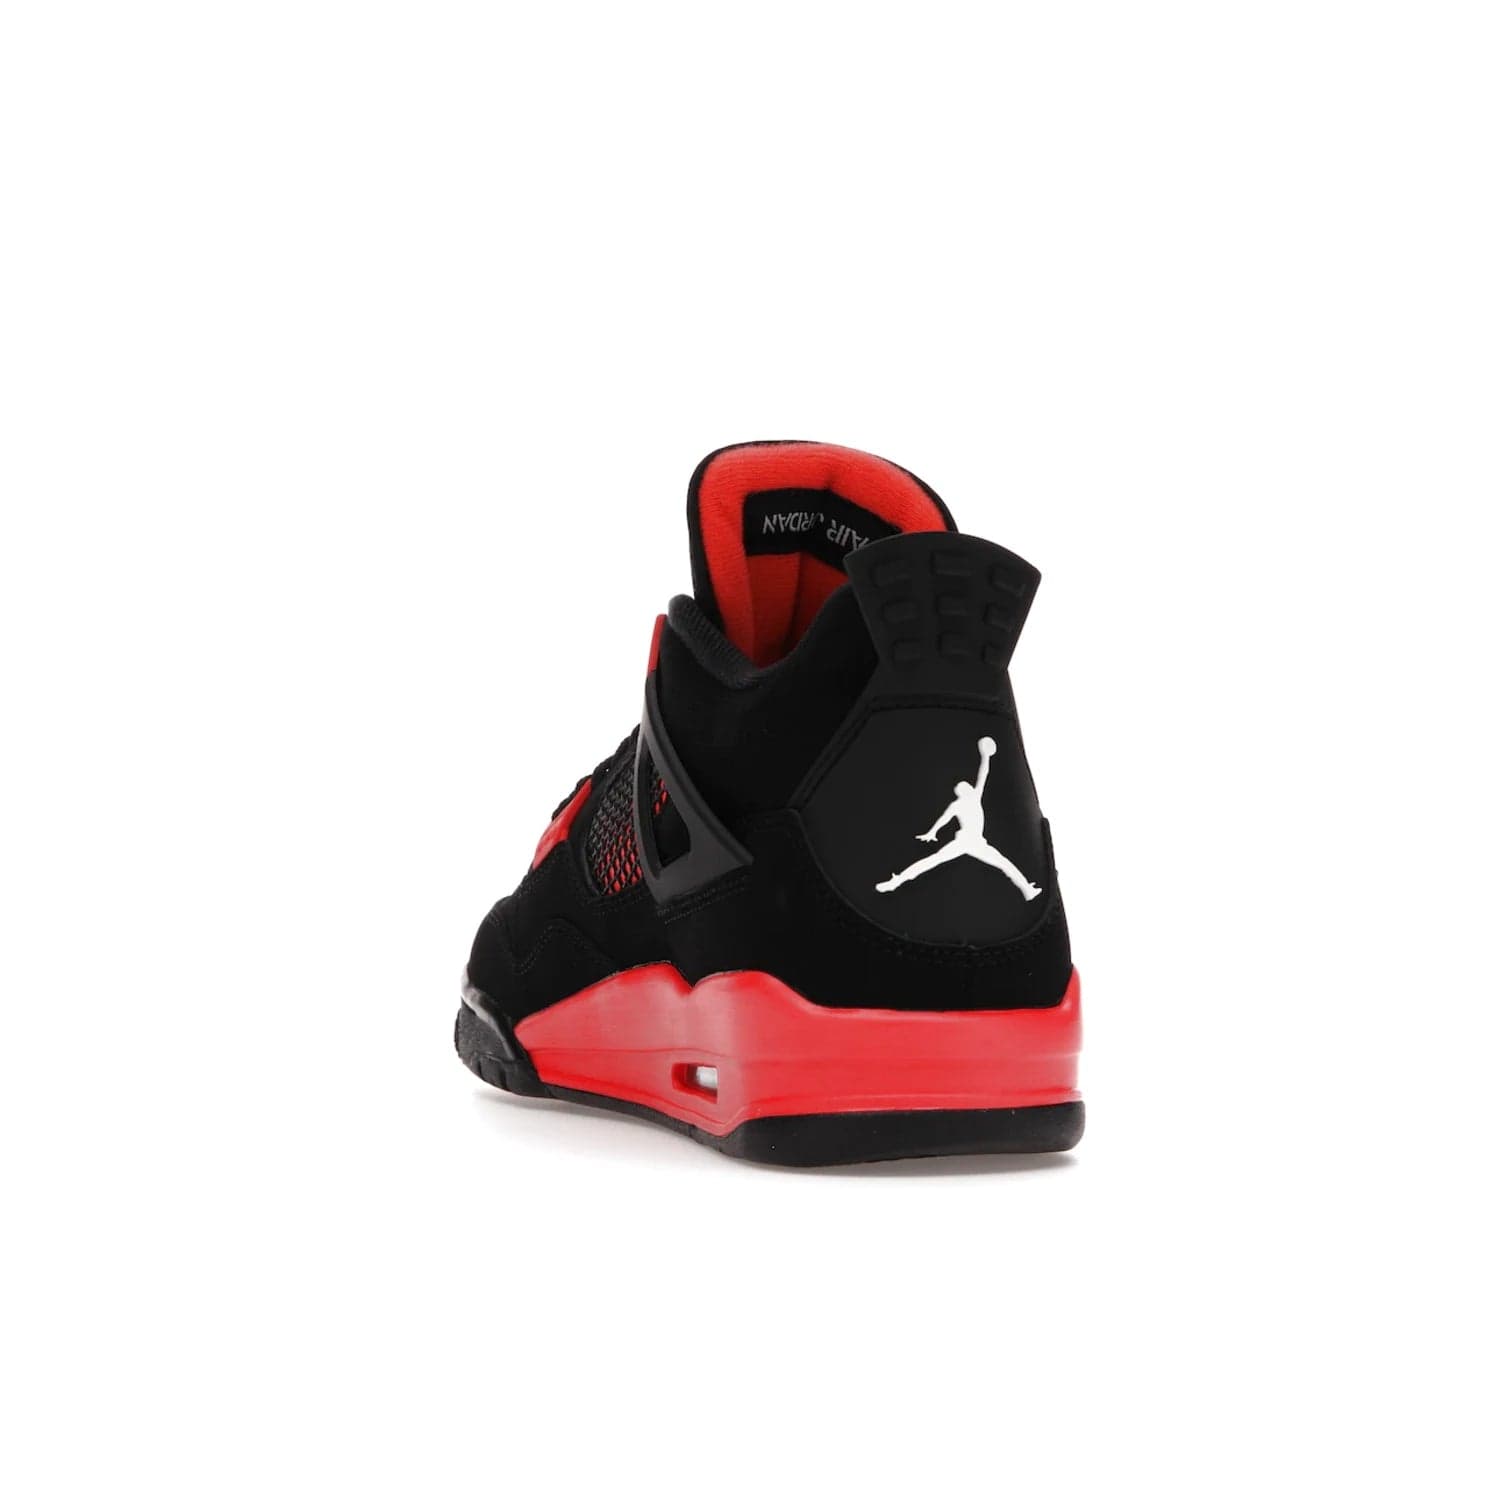 Jordan 4 Retro Red Thunder - Image 26 - Only at www.BallersClubKickz.com - Upscale your footwear with the Air Jordan 4 Retro Red Thunder. Featuring a Durabuck upper, red underlays, signature Flight patch, and vibrant red midsole, this retro sneaker adds style and edge. Releases in January 2022.